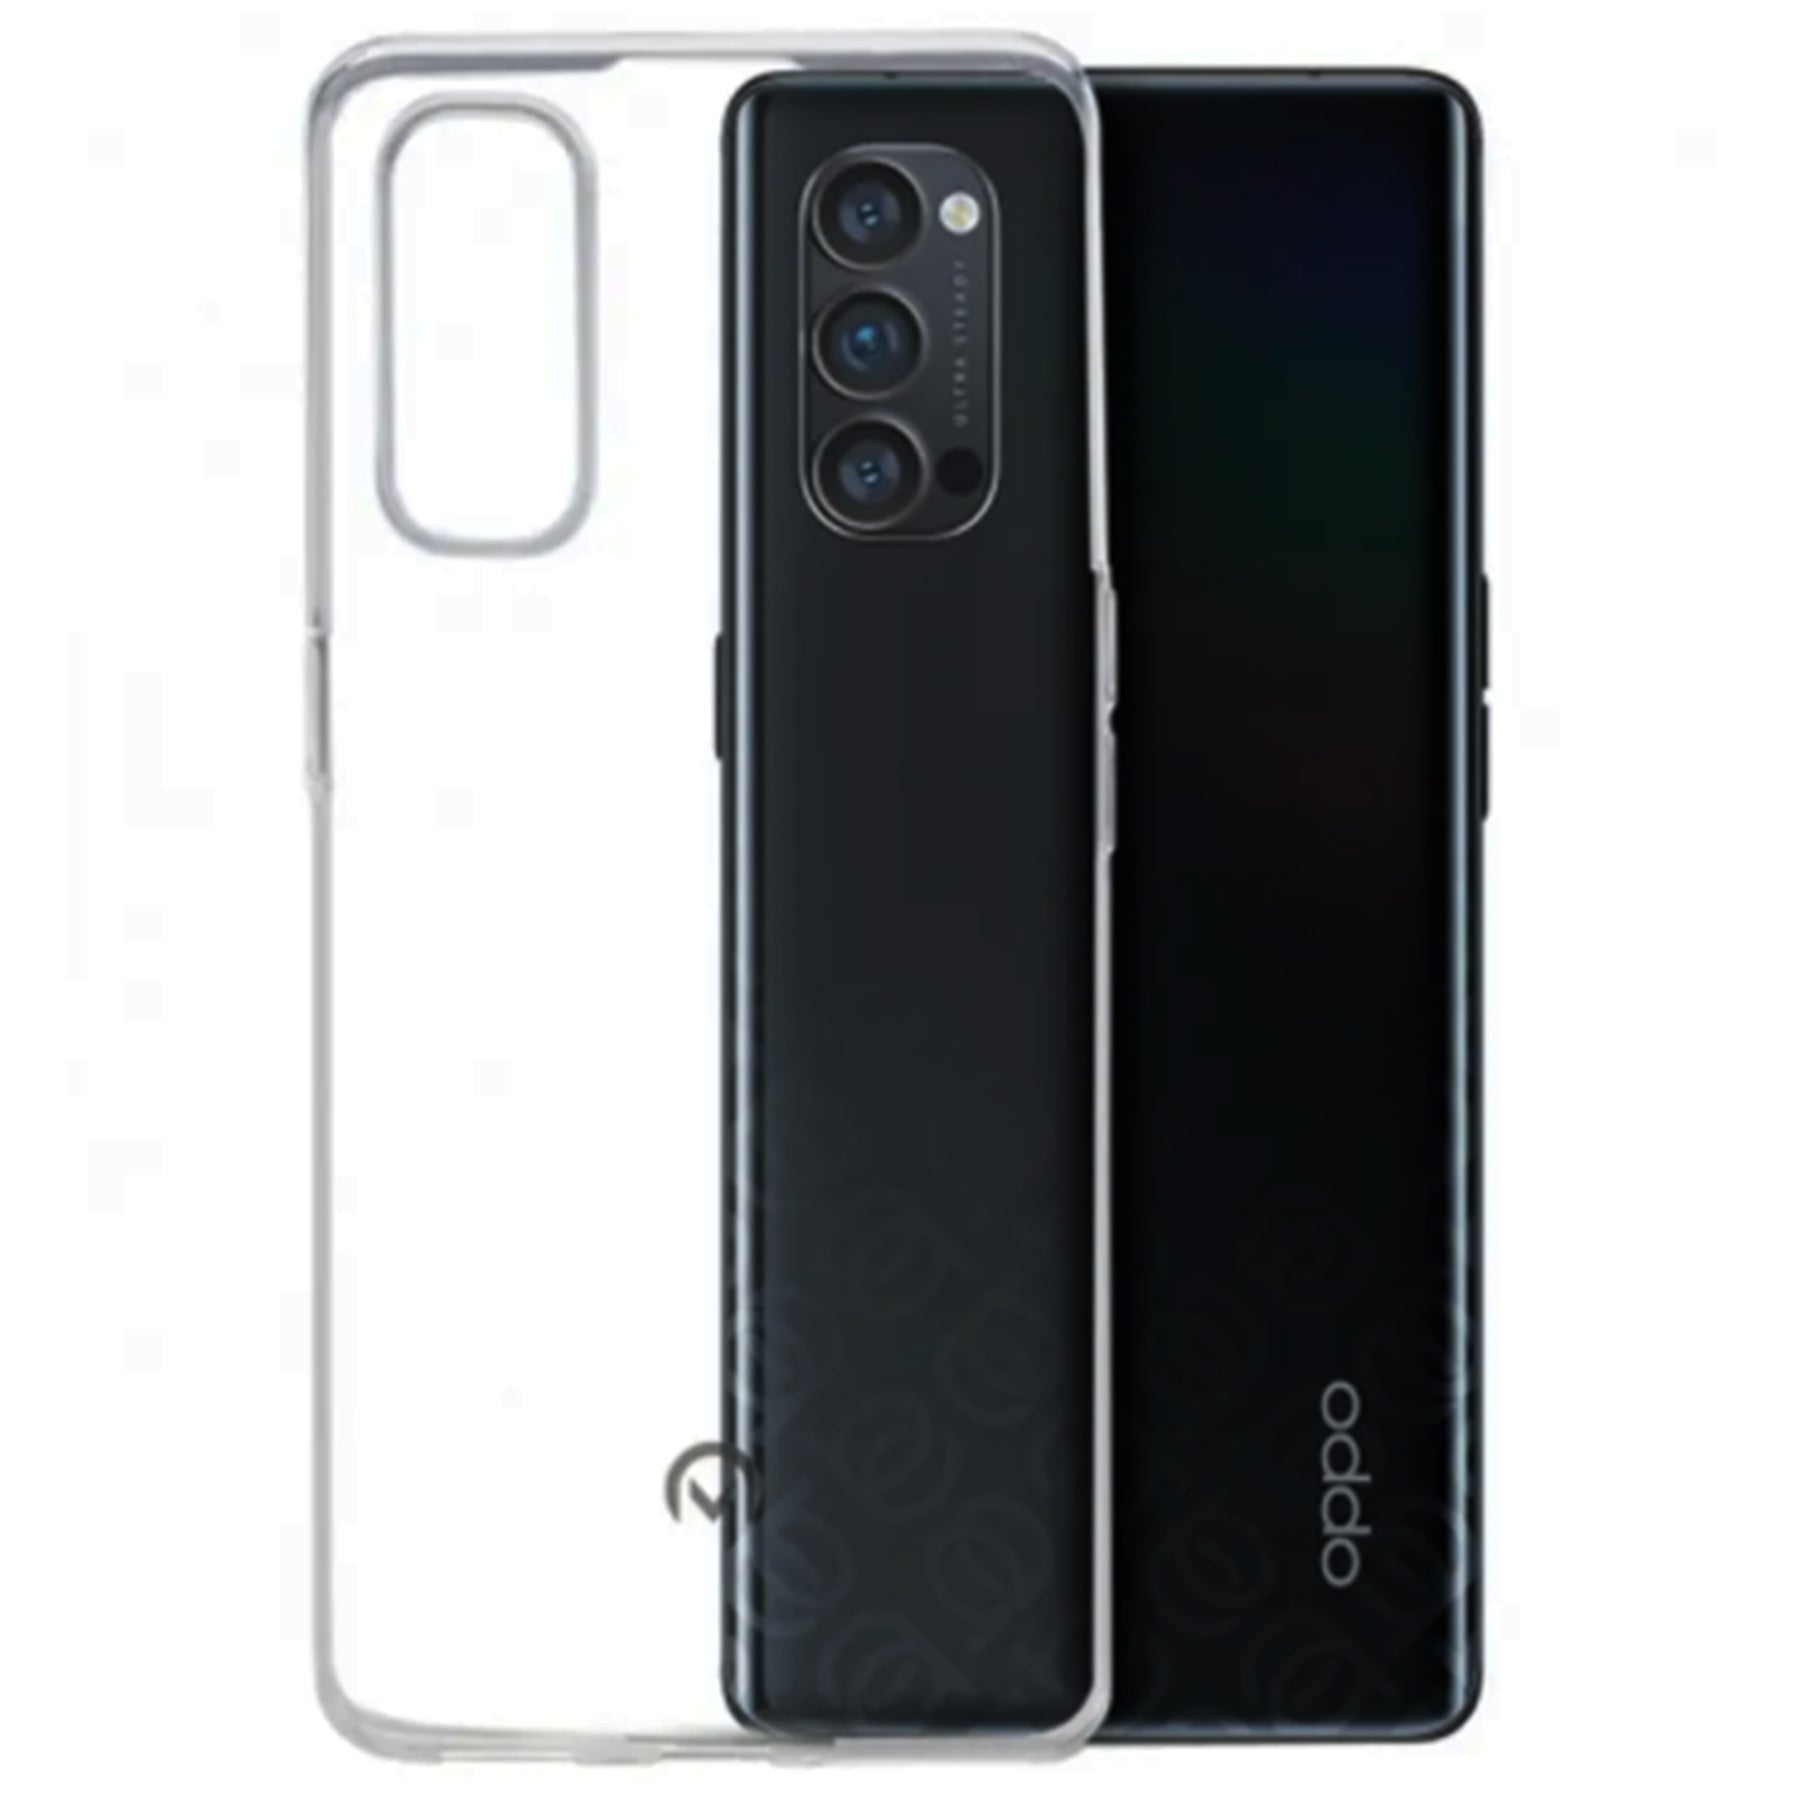 Oppo, FIND X3 Lite 5G, Protective Case, Color Clear